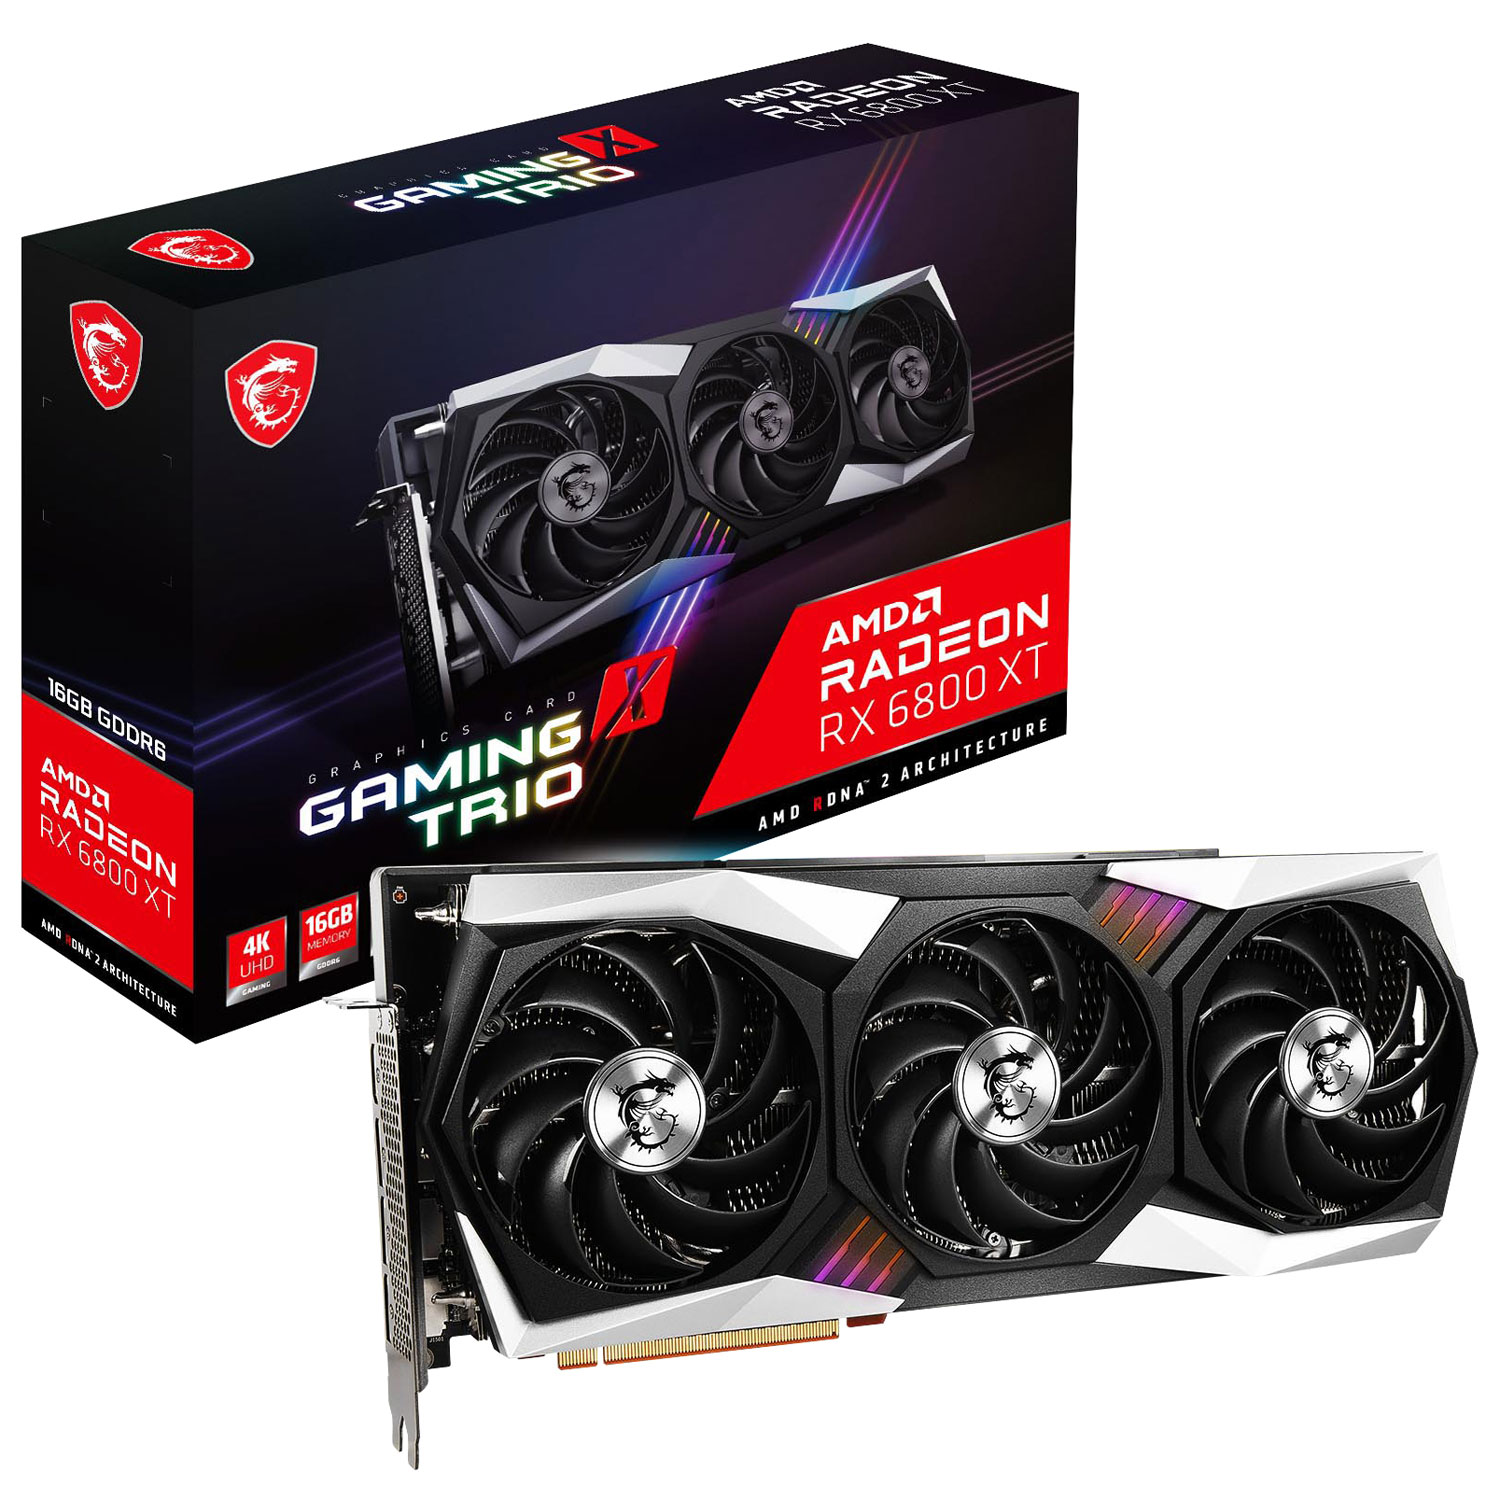 Rx 6800 Where To Buy It At The Best Price In Canada